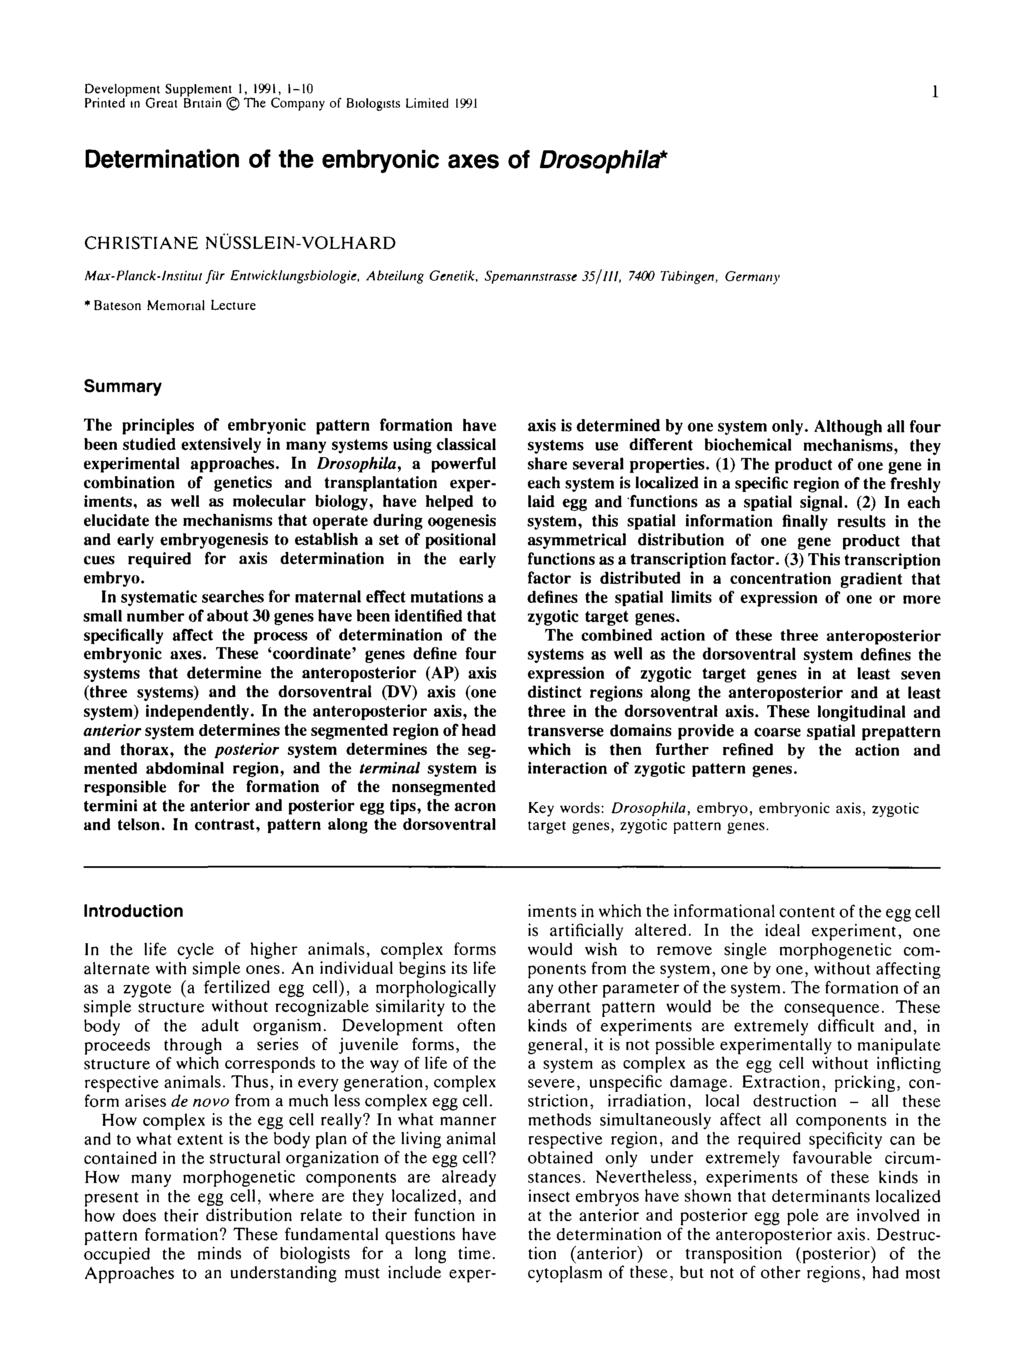 Development Supplement 1, 1991, 1-10 Printed in Great Britain The Company of Biologists Limited 199J Determination of the embryonic axes of Drosophila* CHRISTIANE NUSSLEIN-VOLHARD Max-Planck-lnslitul